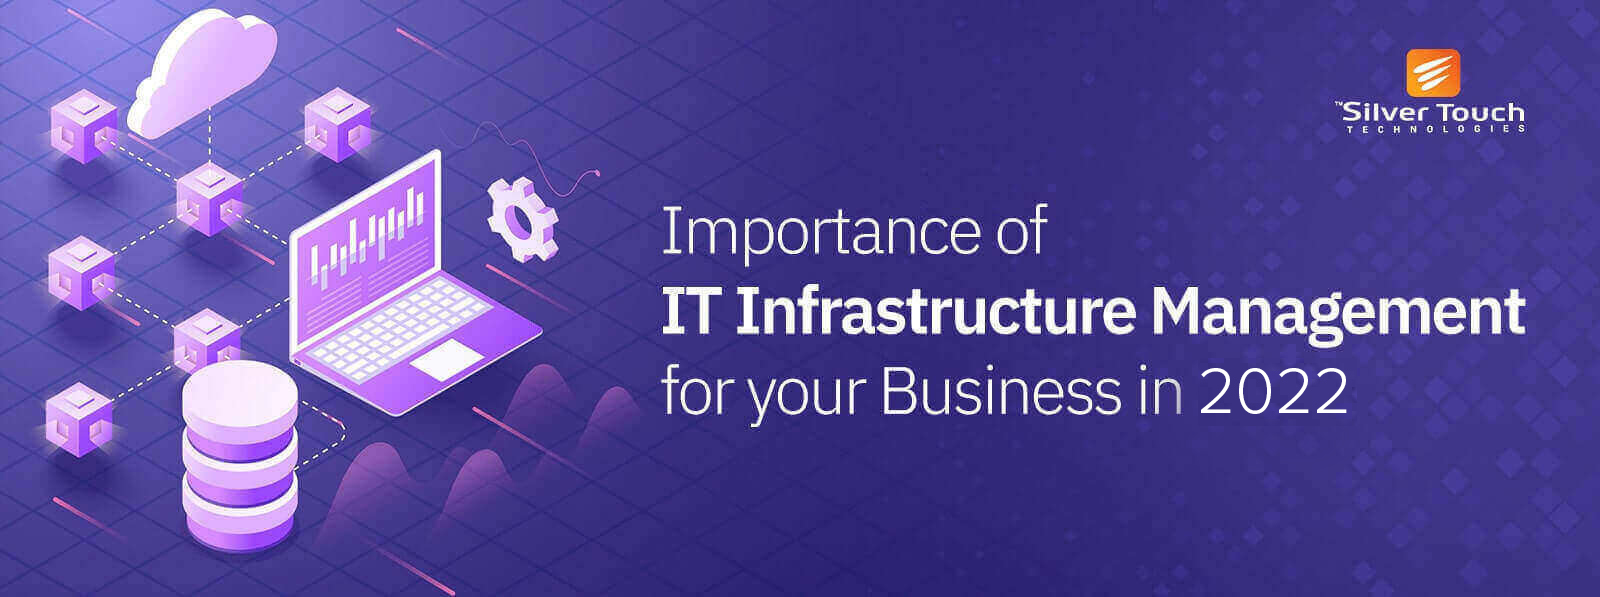 Importance of IT Infrastructure Management for your Business